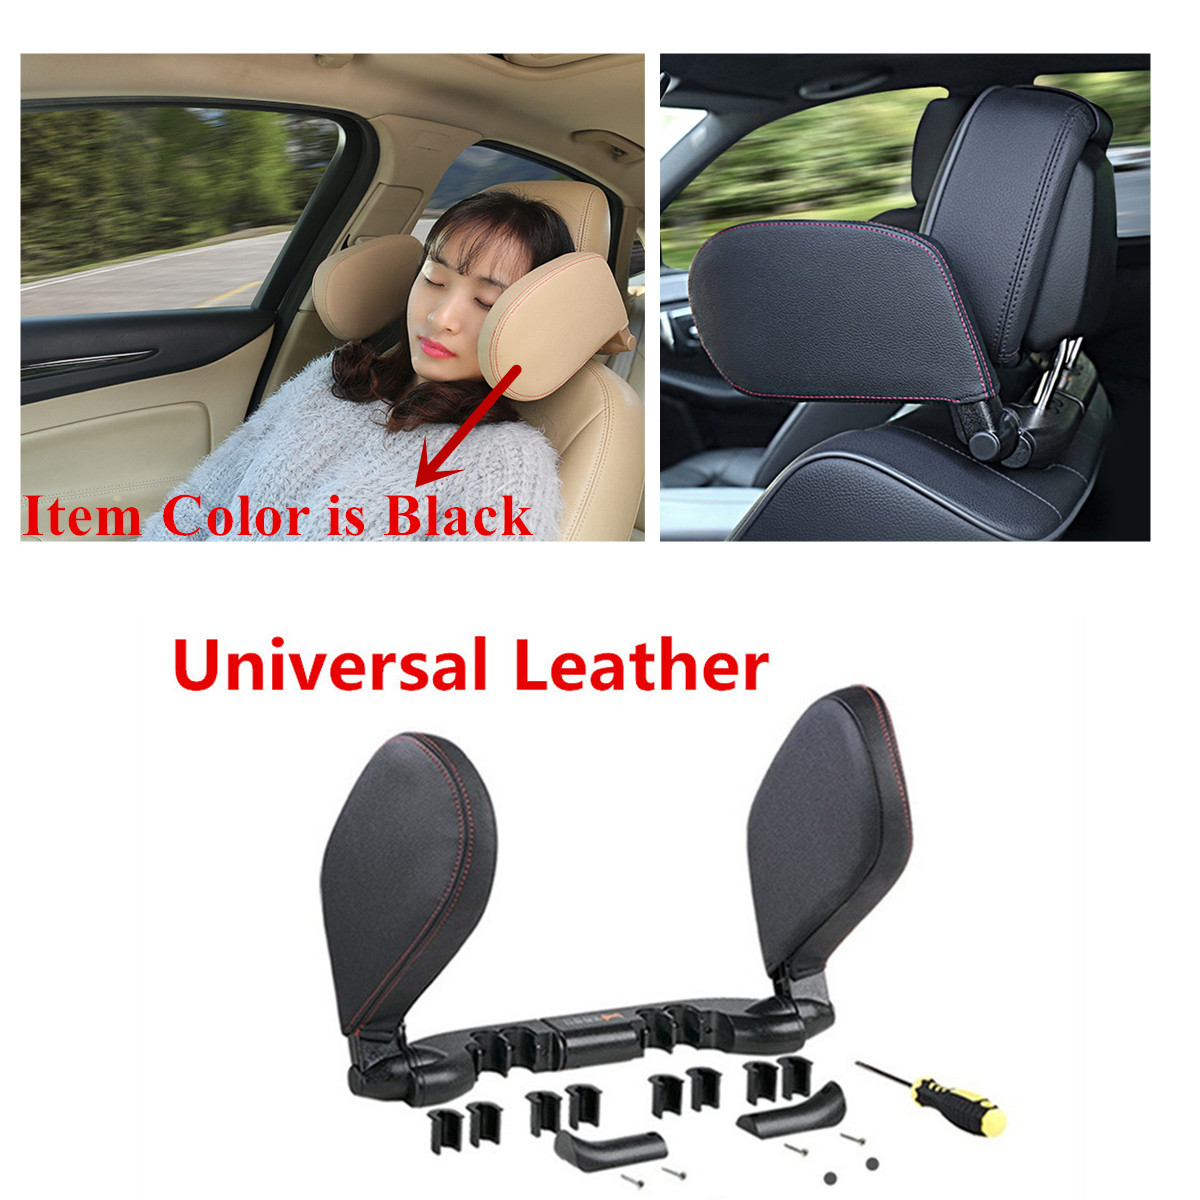 Ace Select Car Neck Pillow 2 Pieces PU Leather Travel Pillow for Head Rest  Neck Support for Car Seat Black Bed Pillows Home vriksha.in